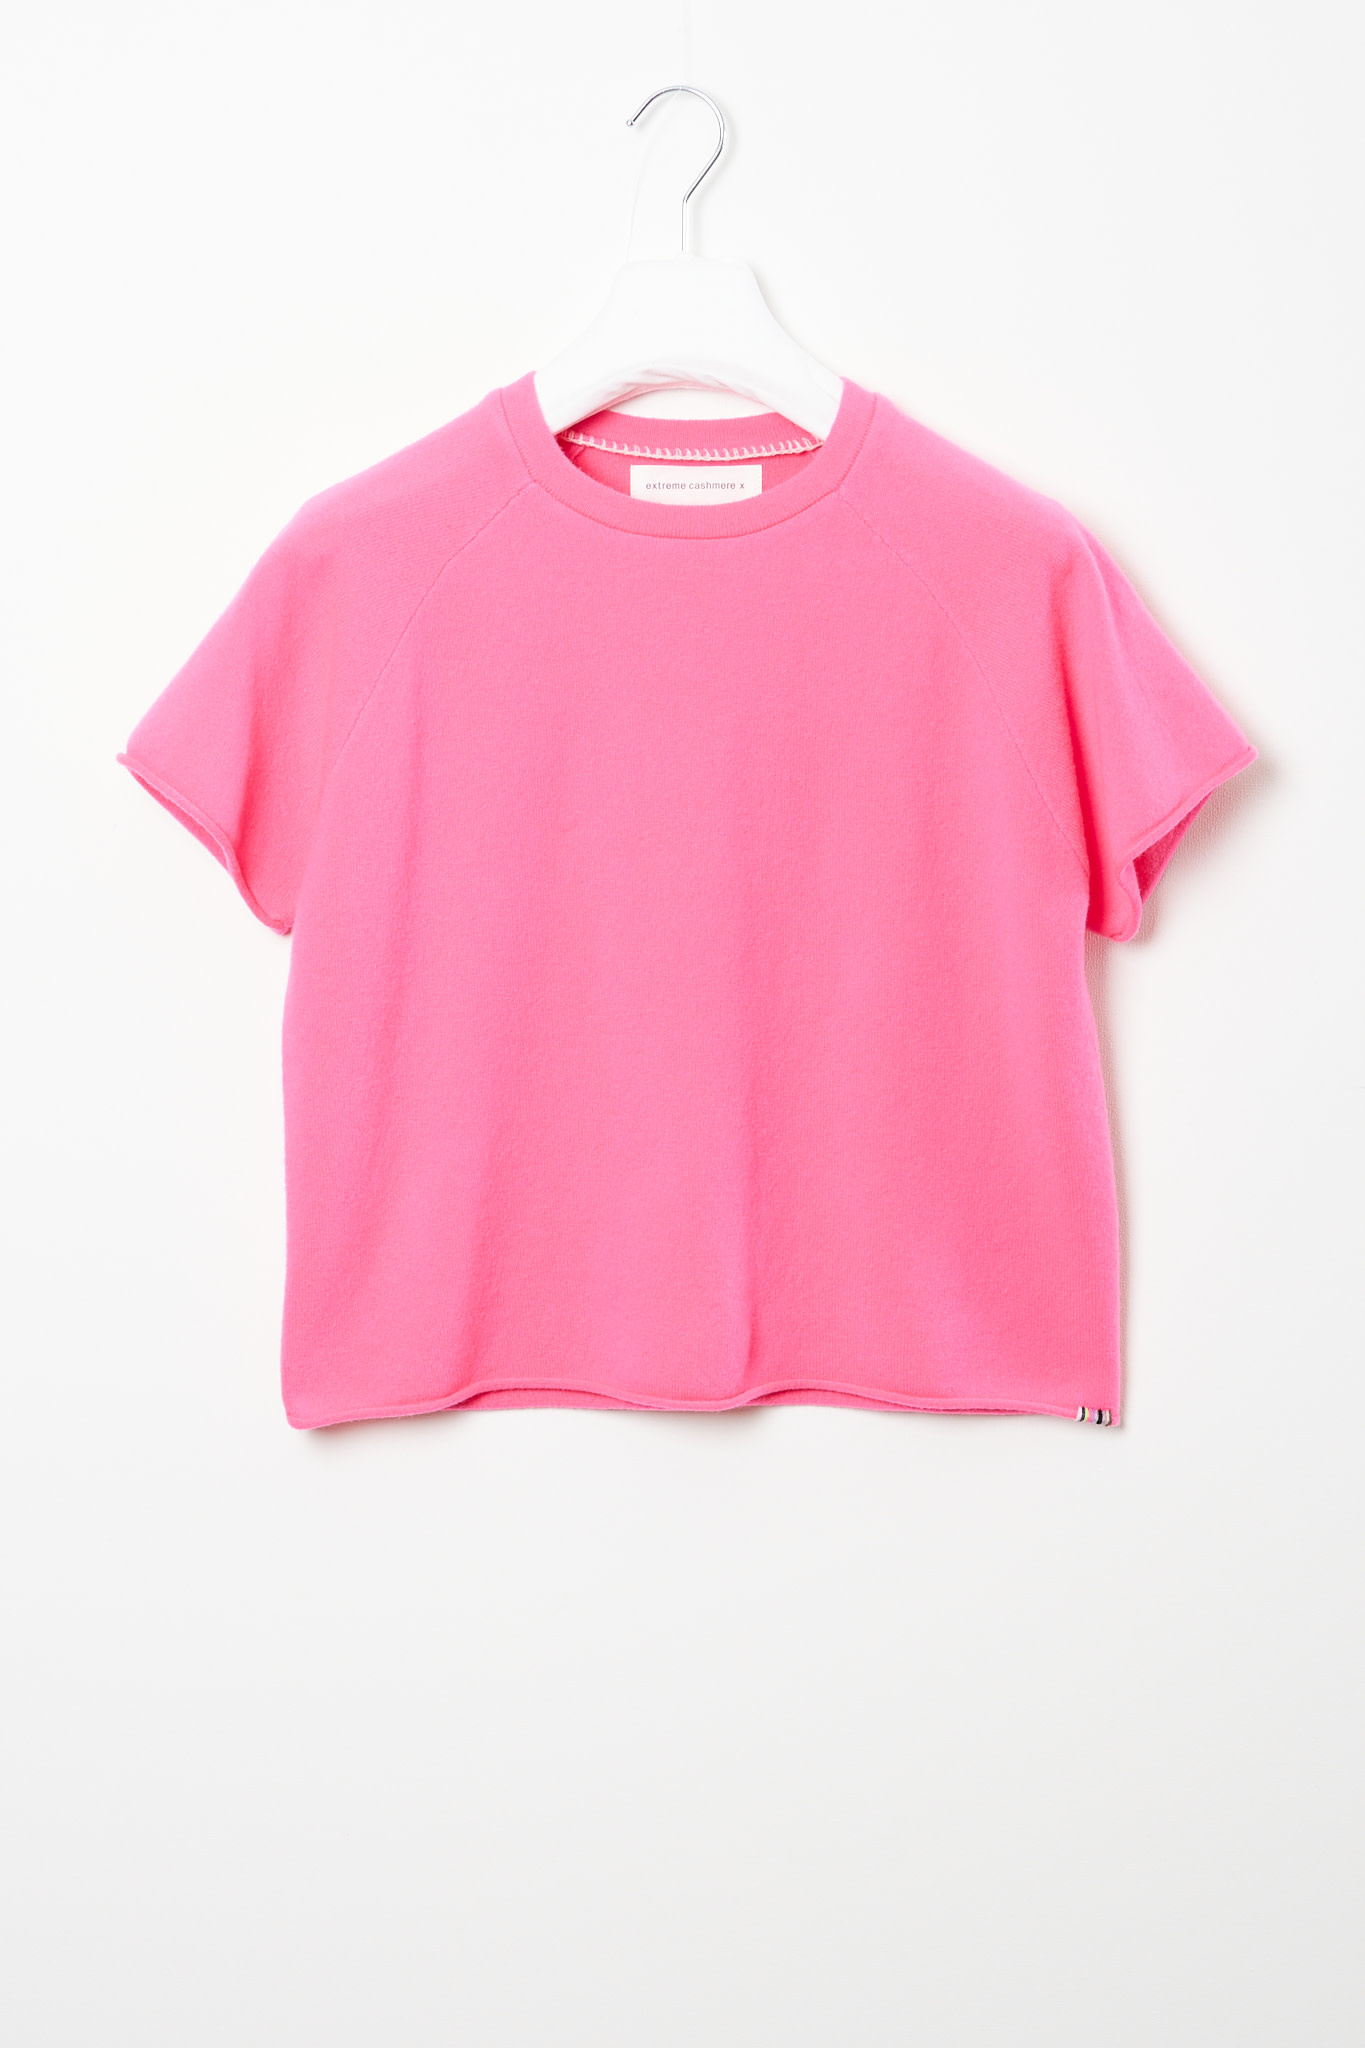 extreme cashmere - Teddy top